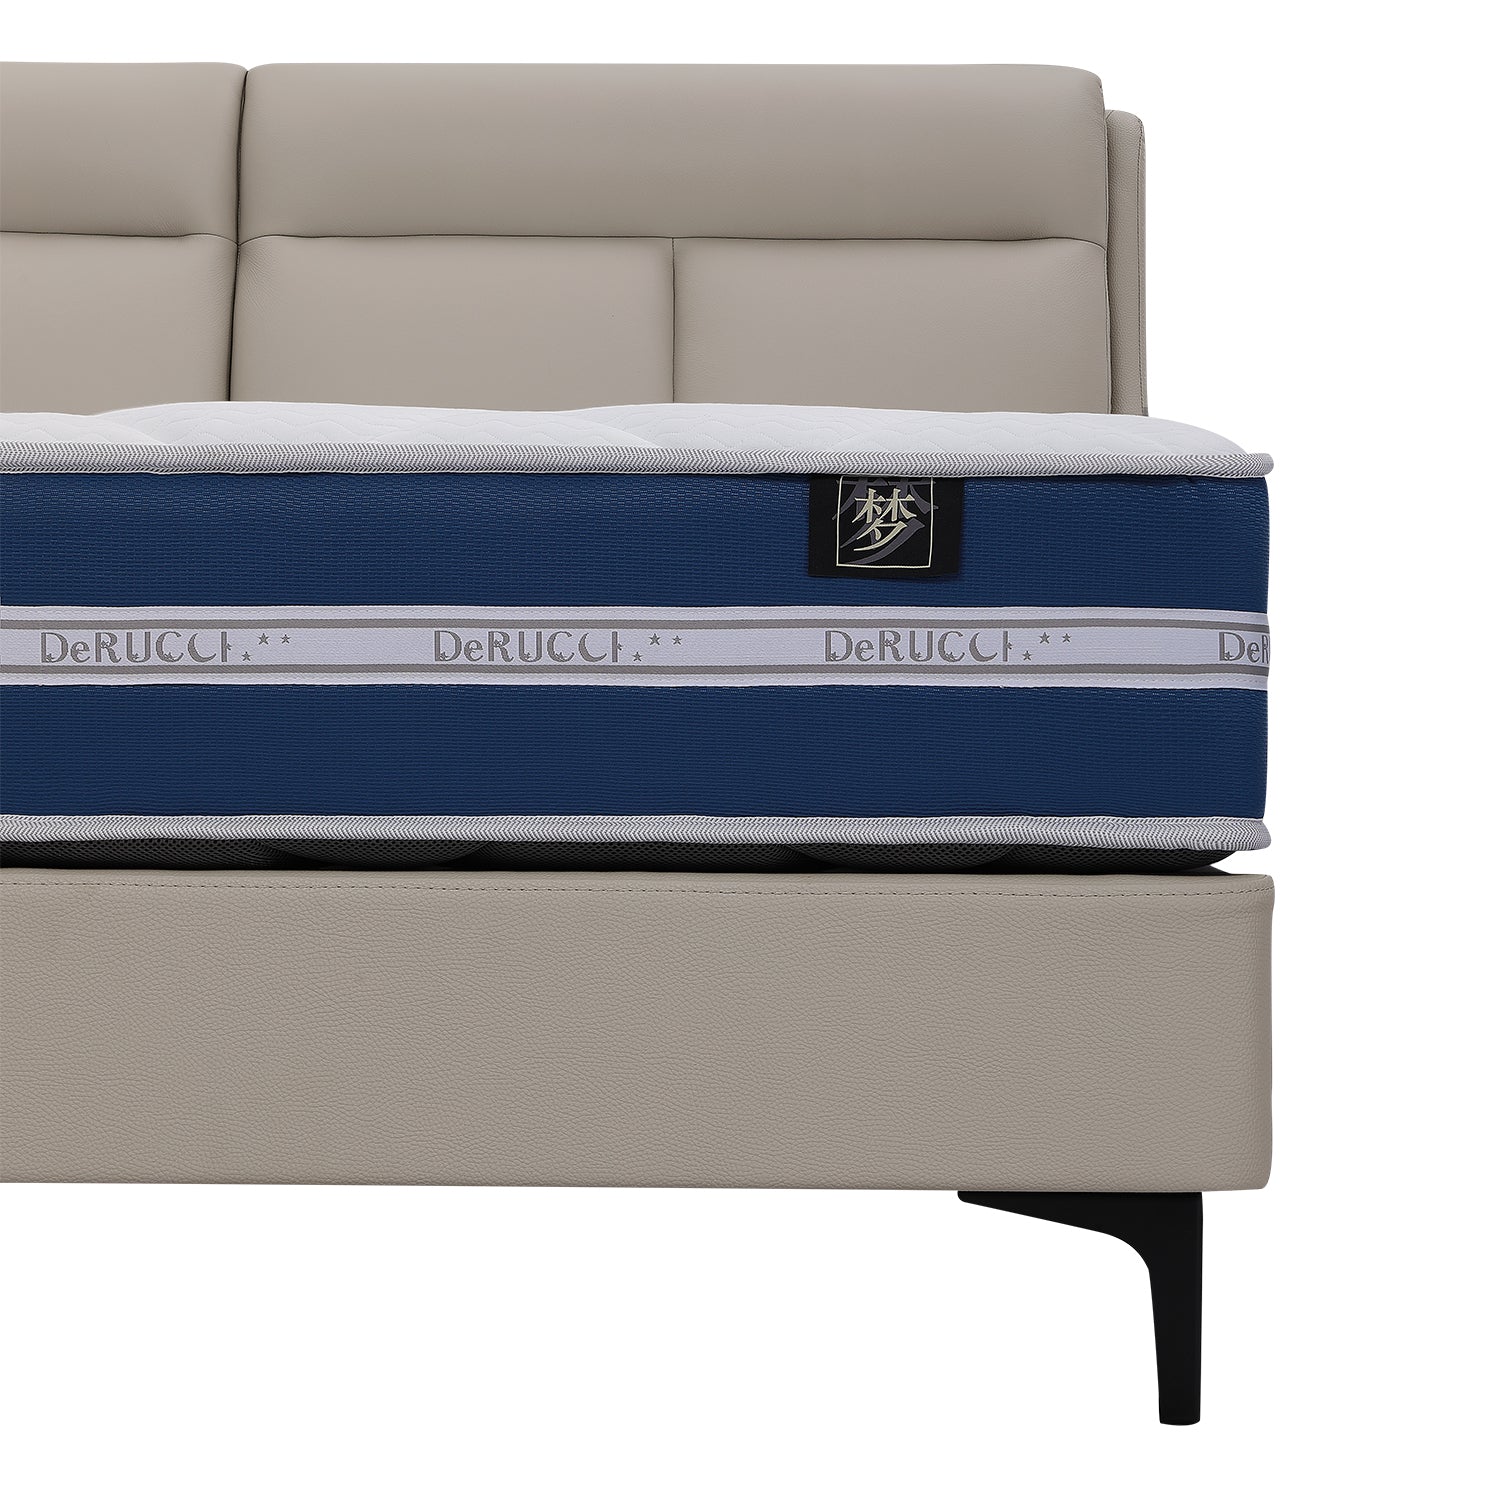 BOC1 - 002 bed frame with beige headboard and blue and white DeRUCCI mattress. Side view showcasing bed materials and mattress thickness.